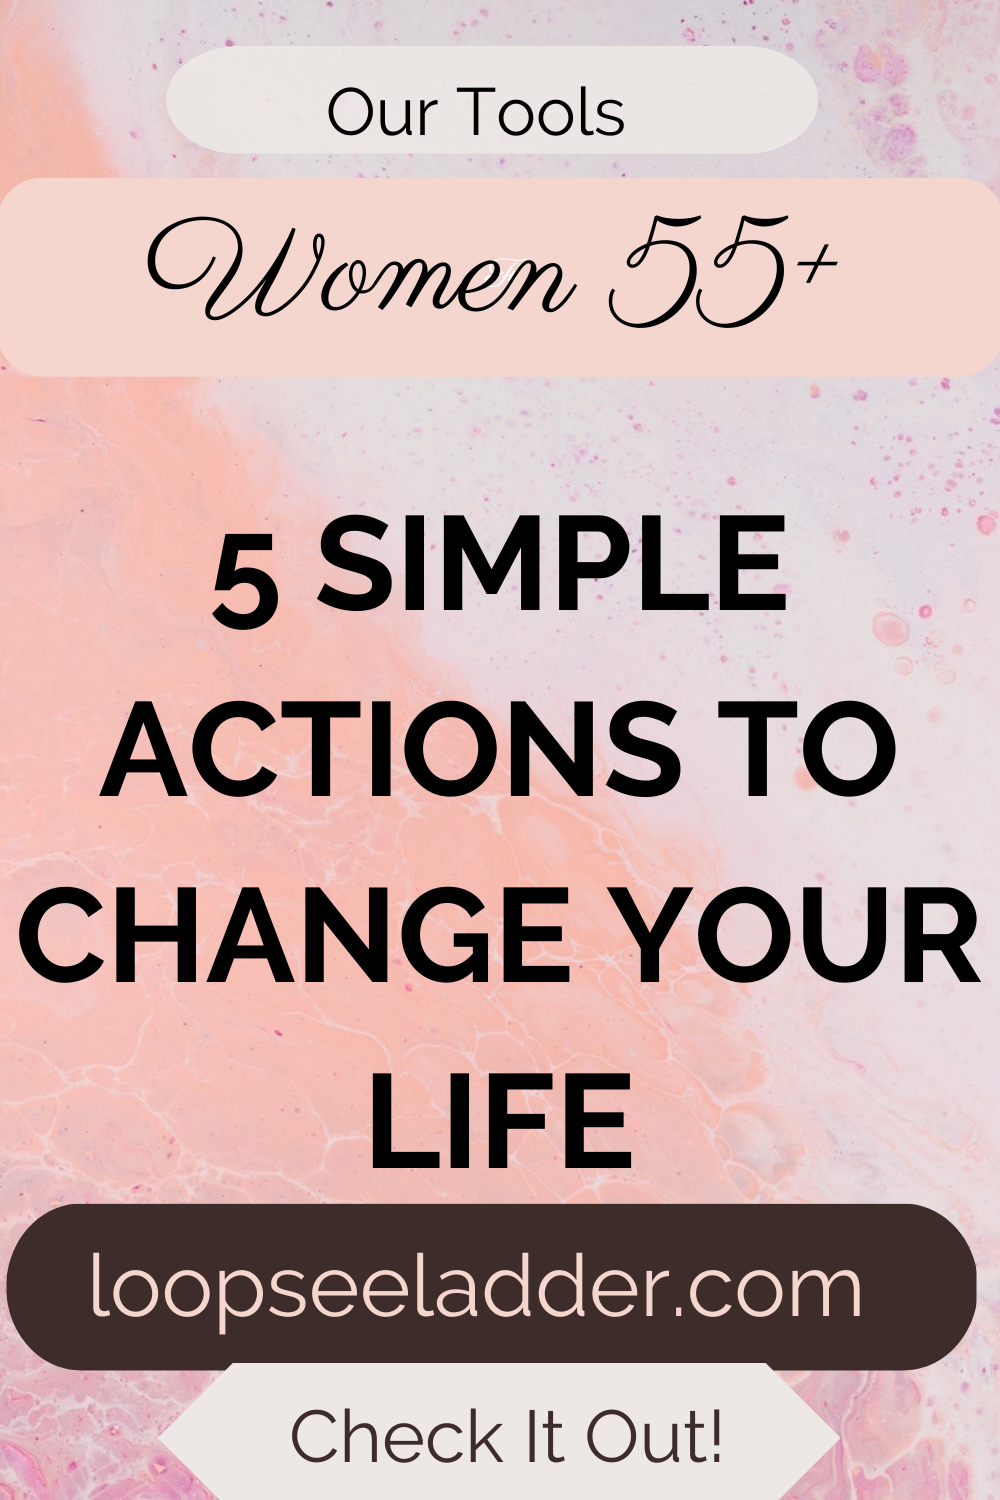 5 Simple Actions to Change Your Life